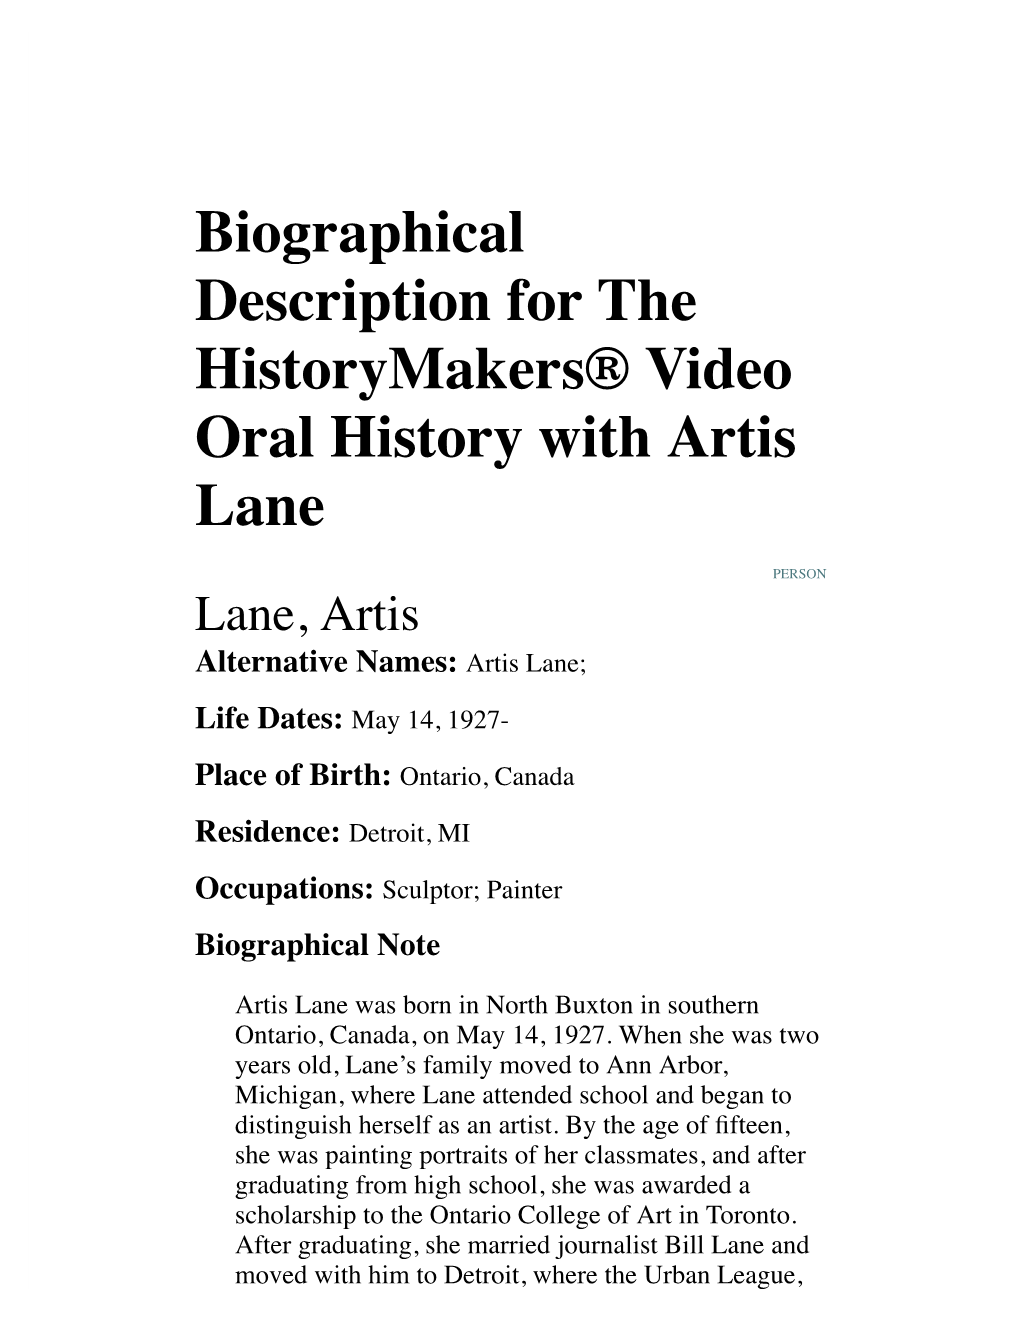 Biographical Description for the Historymakers® Video Oral History with Artis Lane